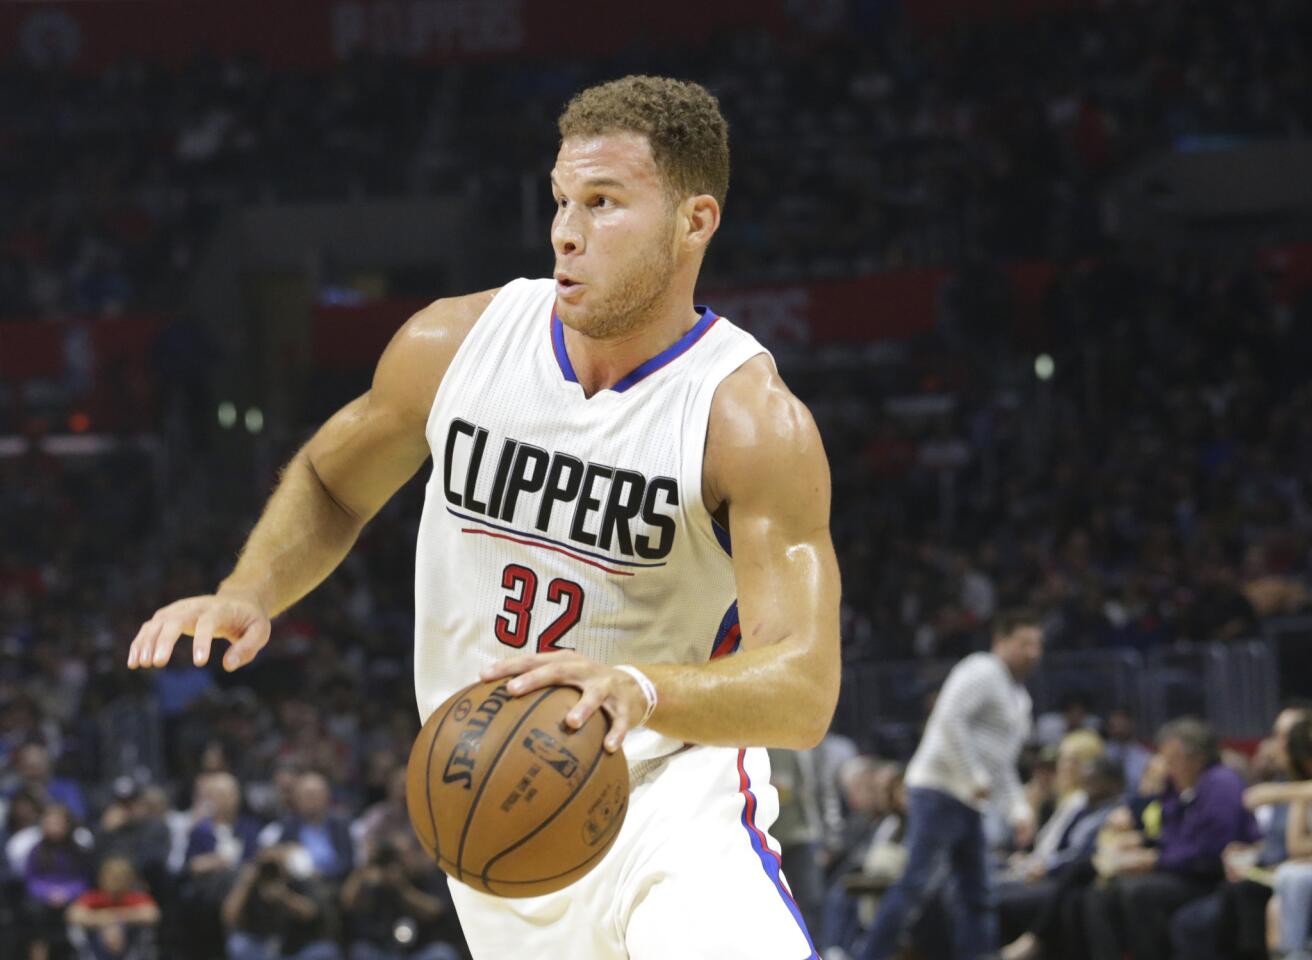 Blake Griffin and Clippers are 4-0, but as usual it's all about the Warriors